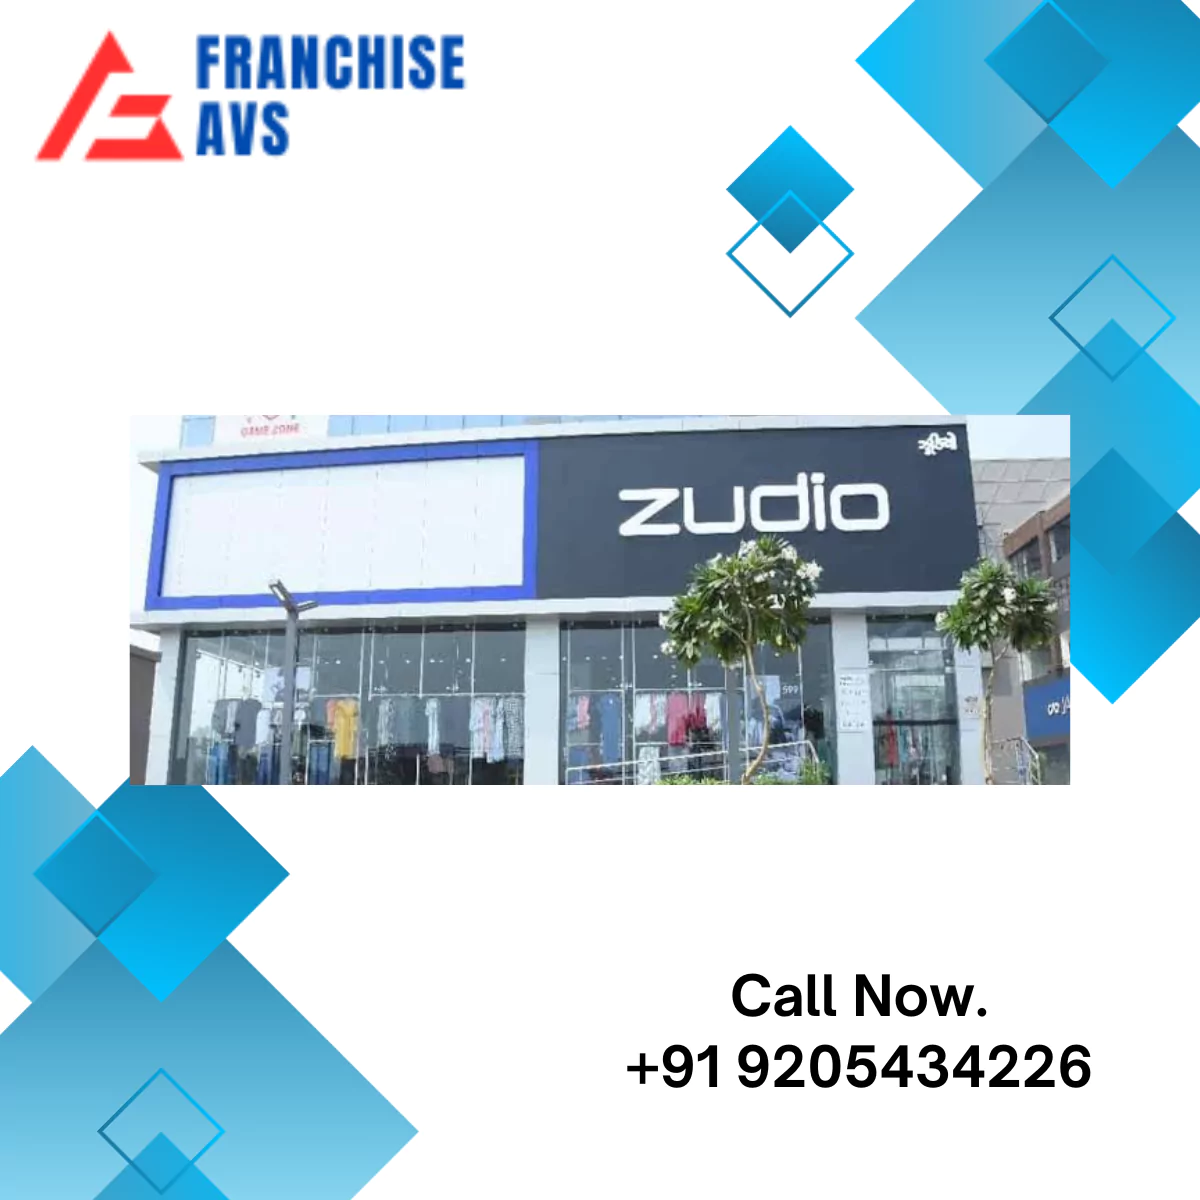 Zudio franchise and leasing in delhi ncr india